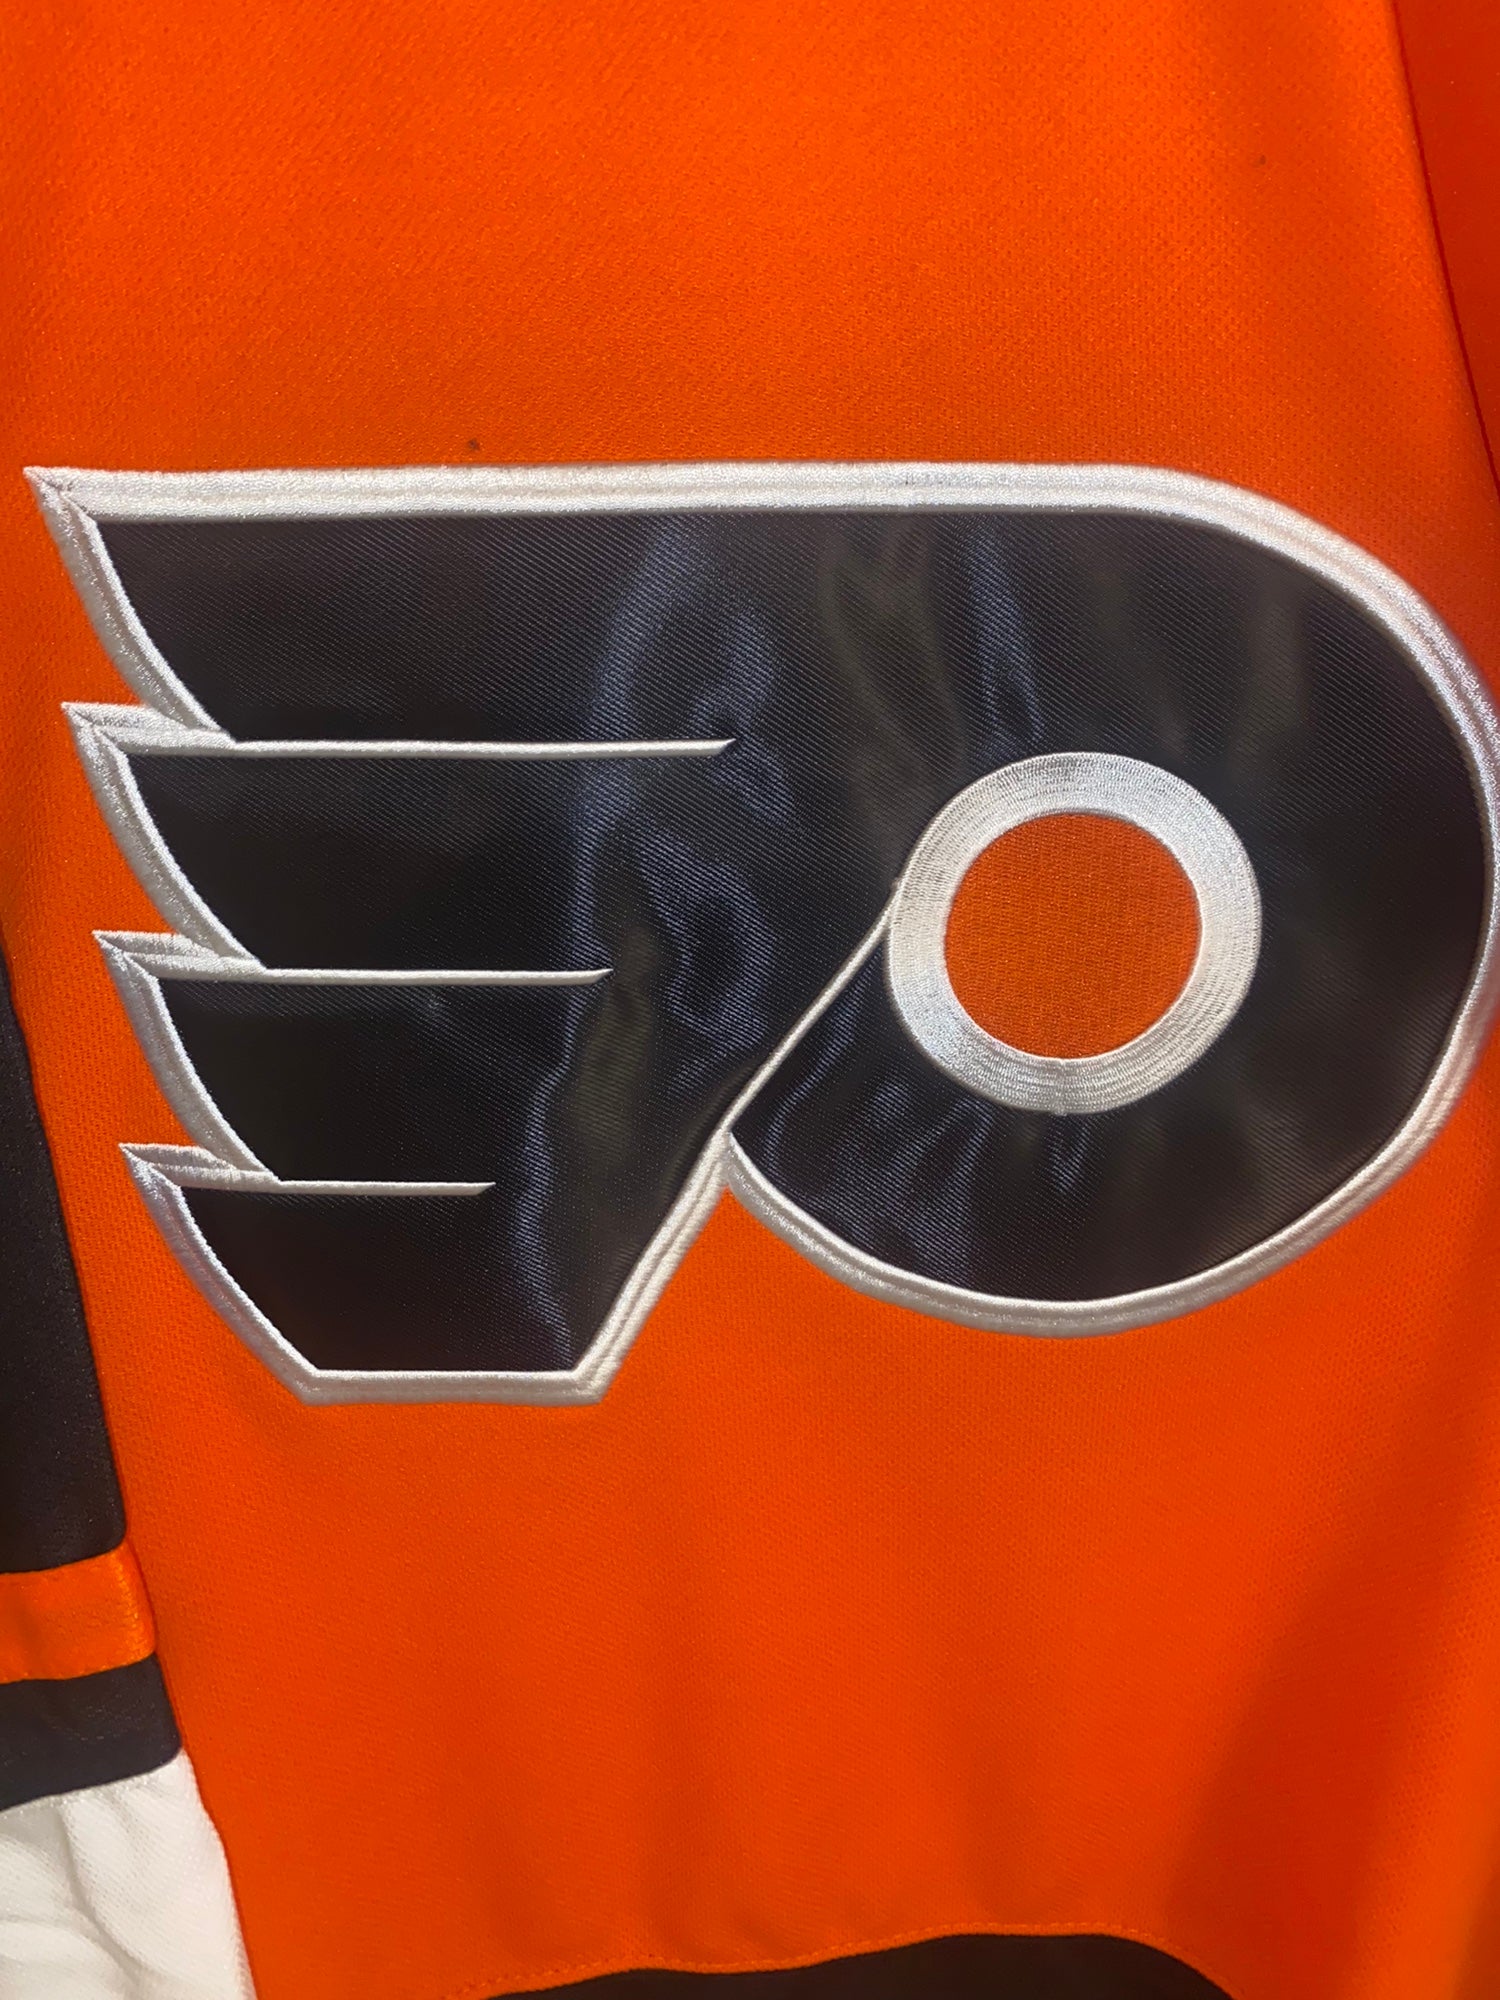 2021 Flyers Winter Classic Jersey. Autographed . for Sale in